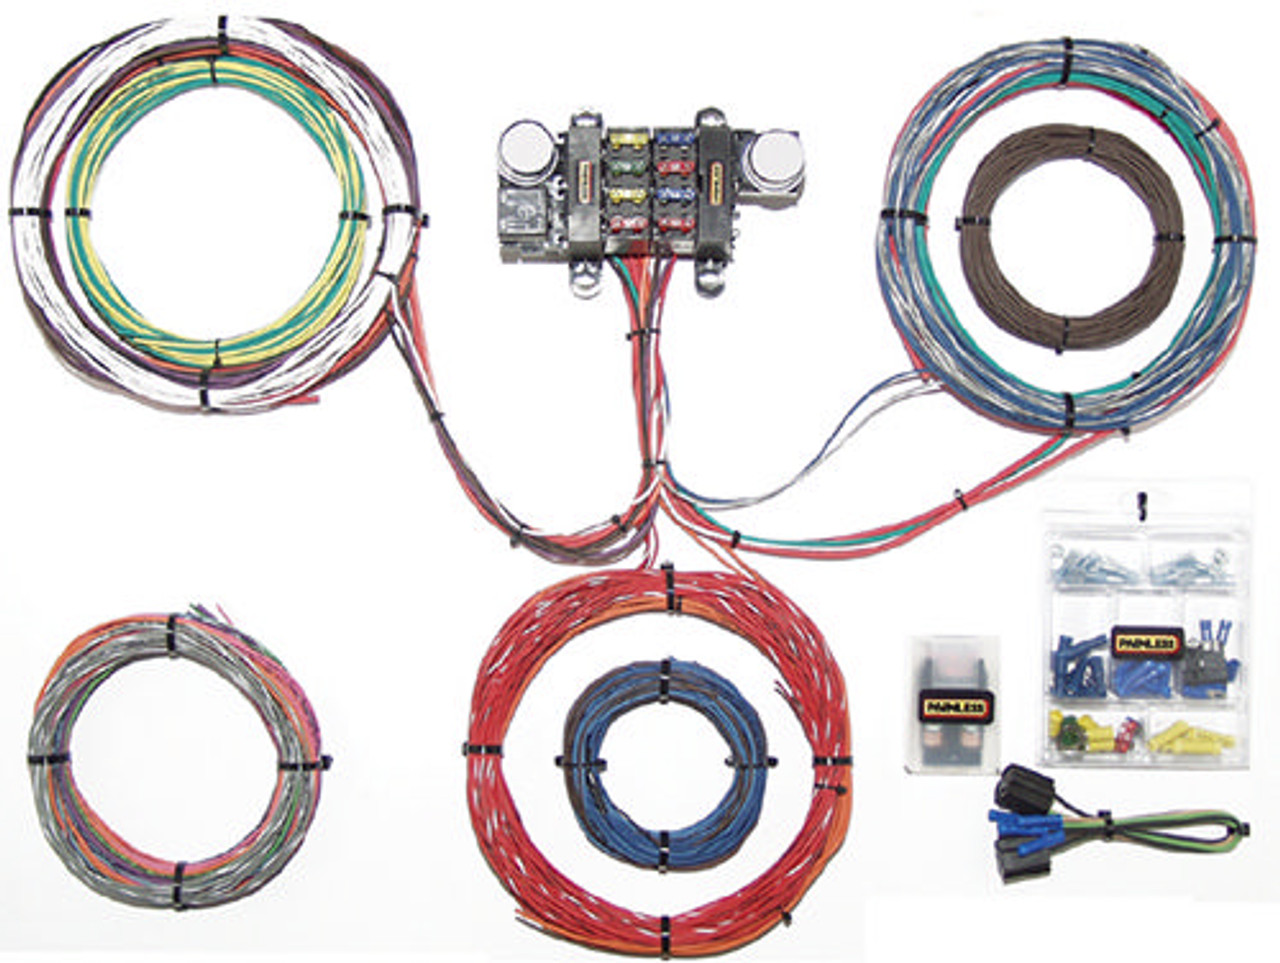 Painless 18 Circuit T-Bucket Wiring Harness - PWI10308